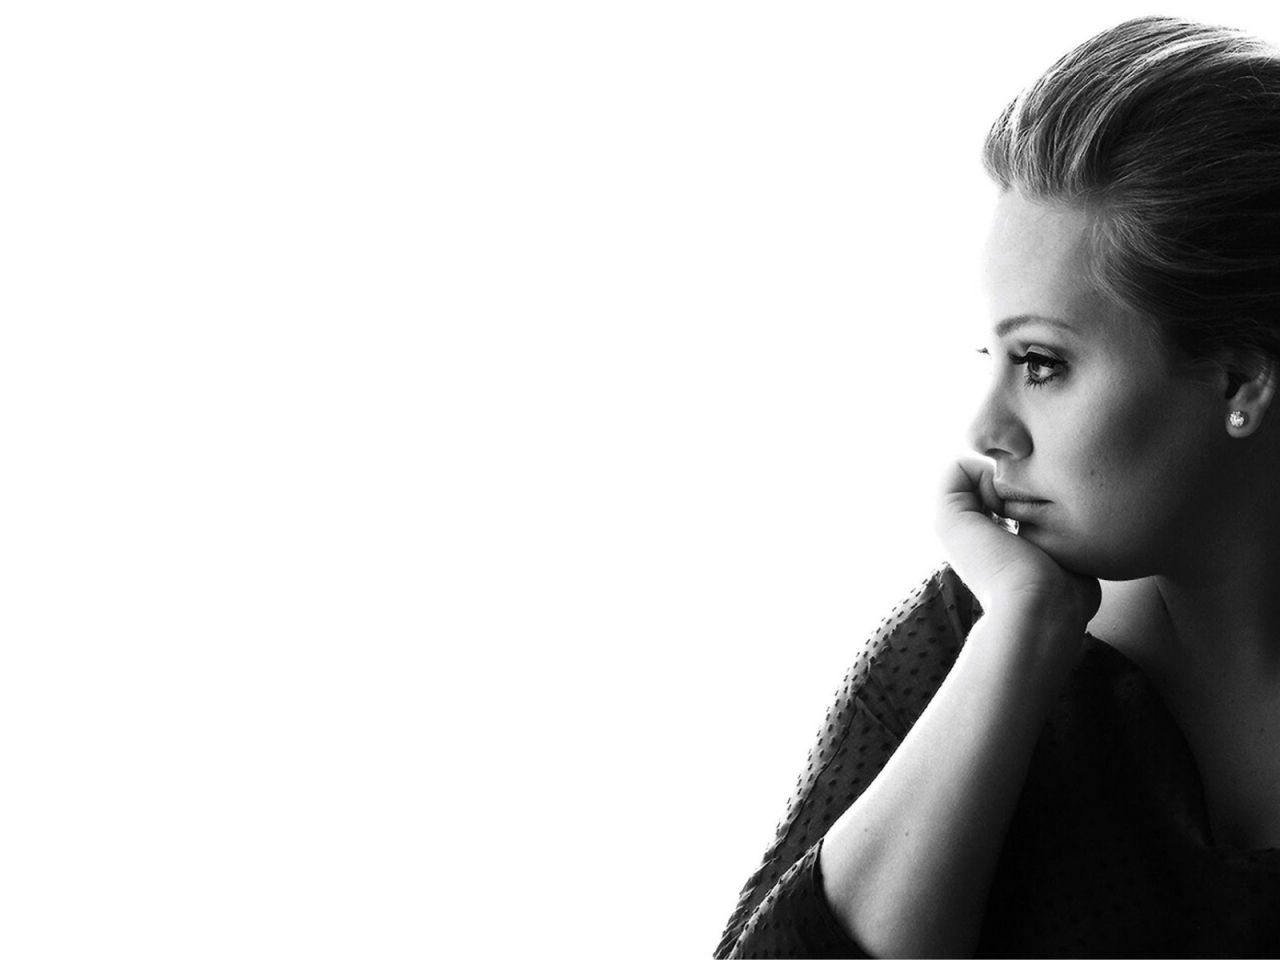 Adele Black and White for 1280 x 960 resolution